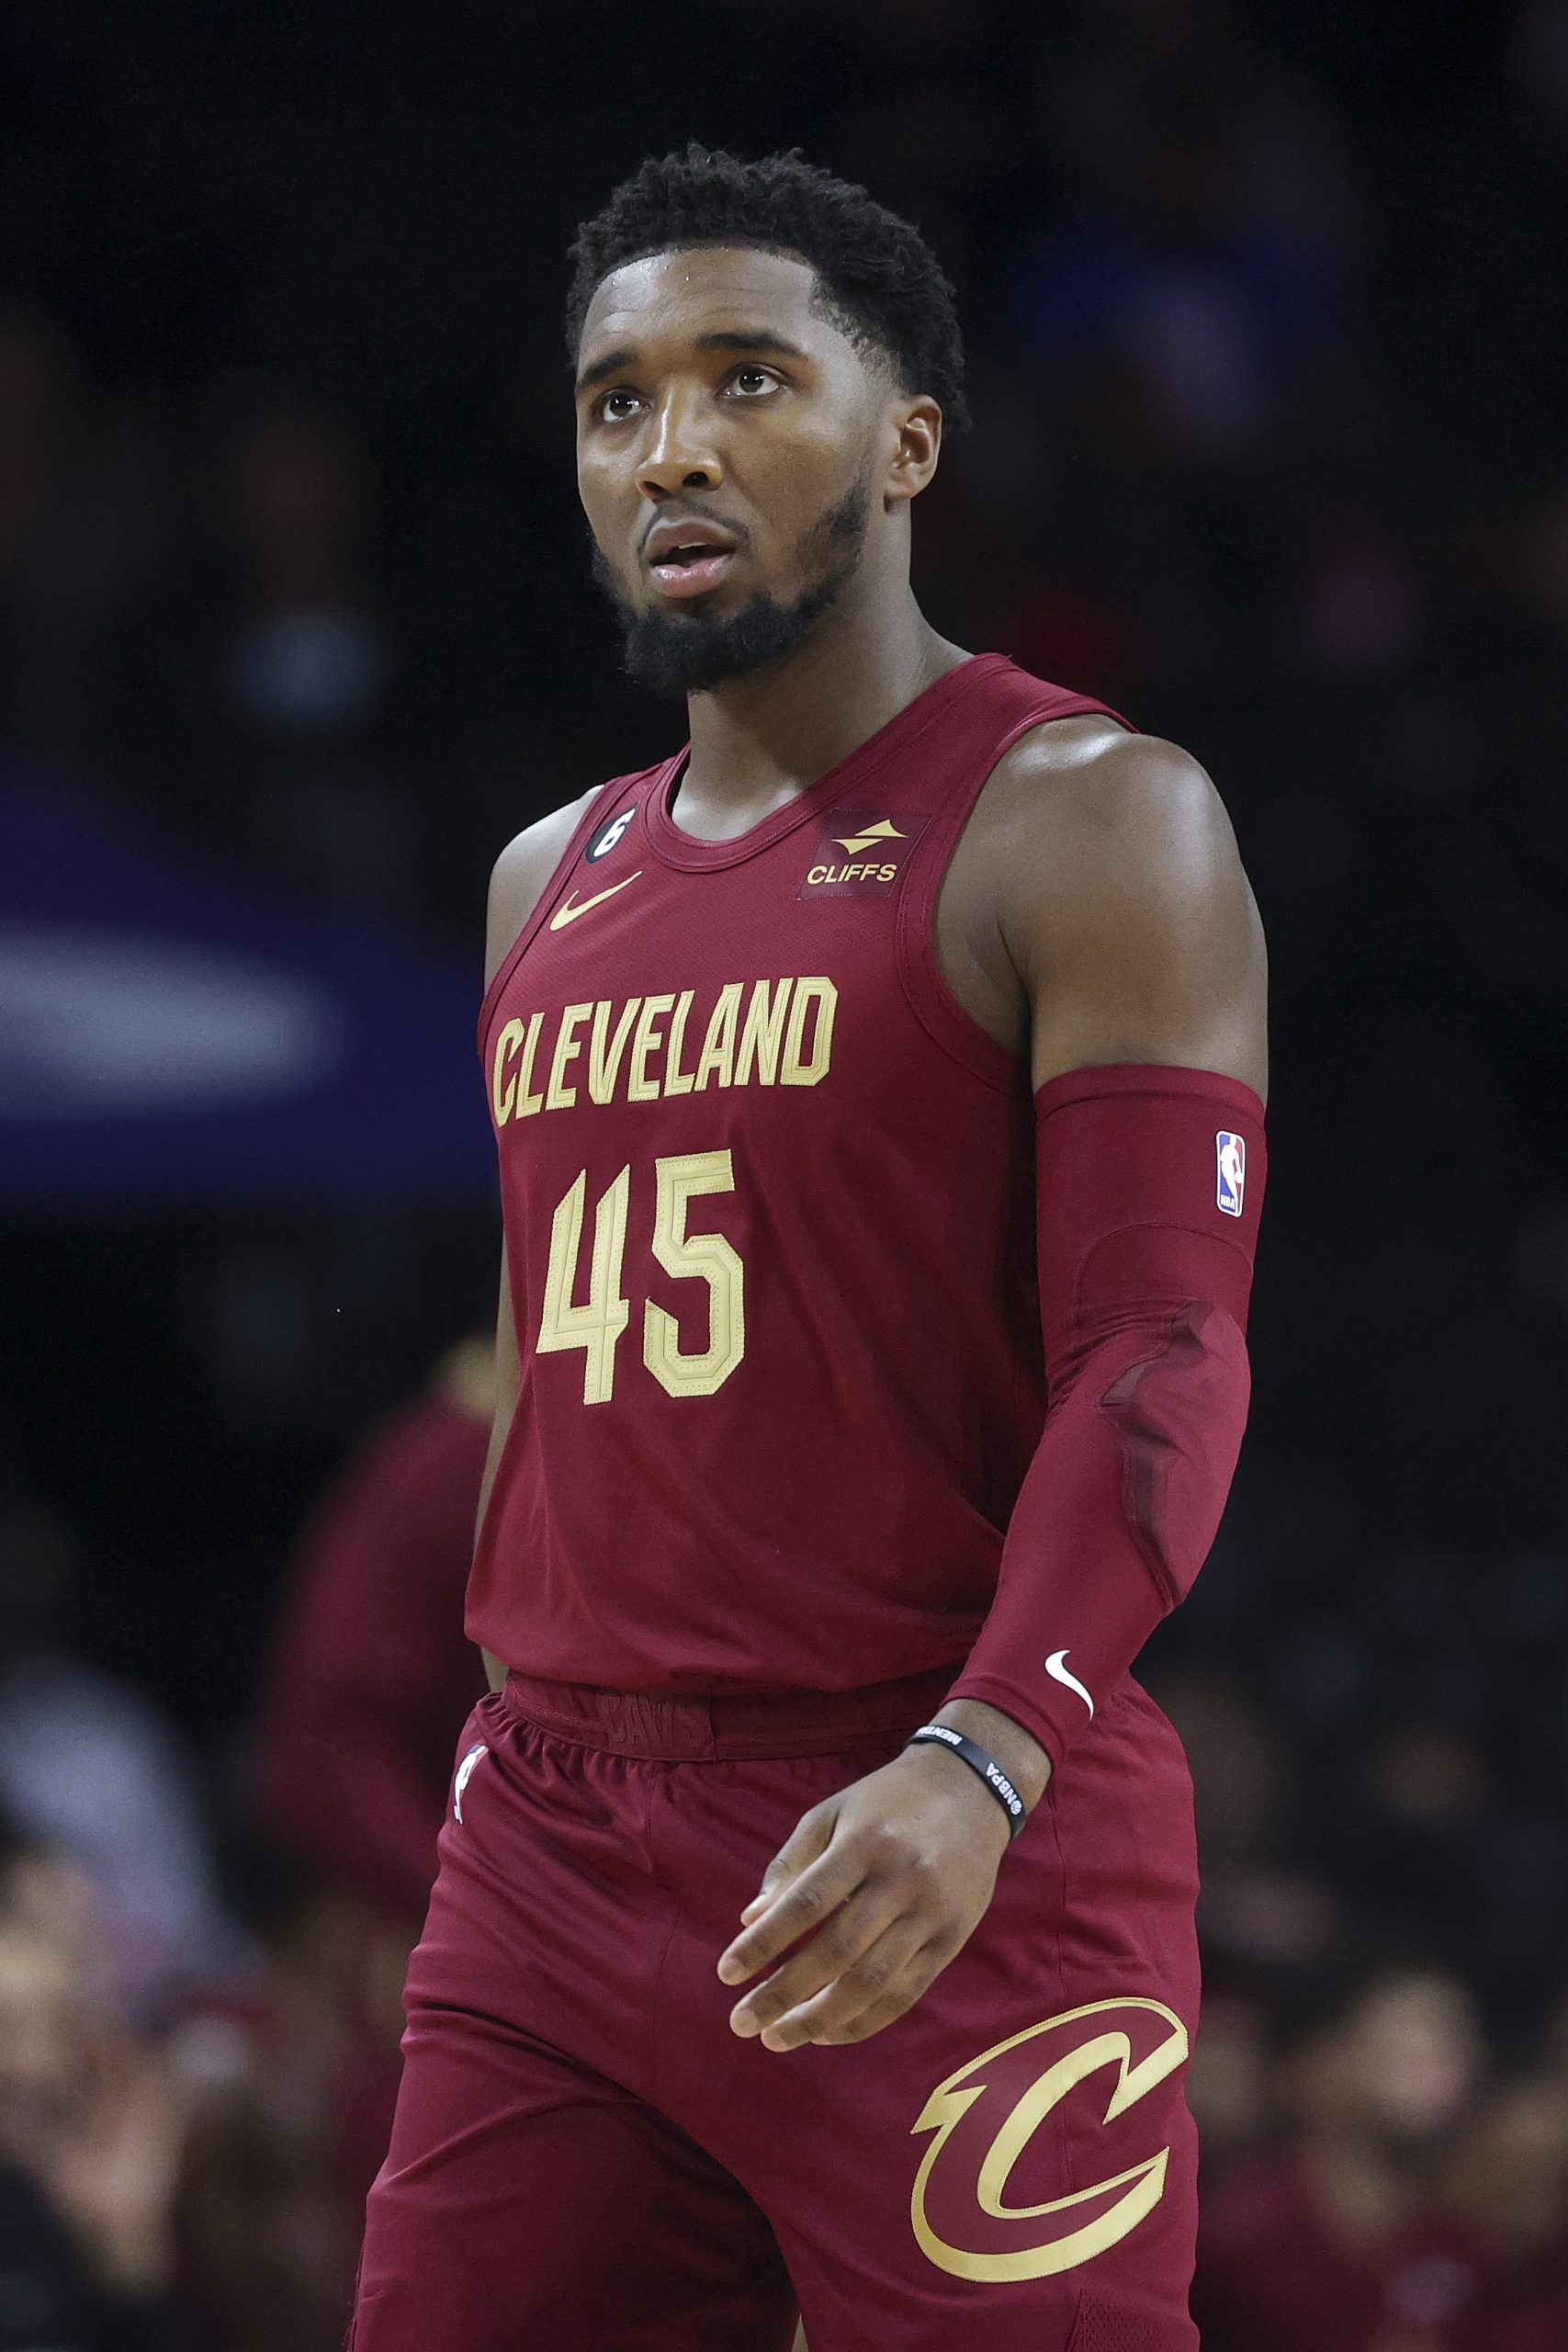 Projecting the Cavs' top 3 deep shooters for 2022-23